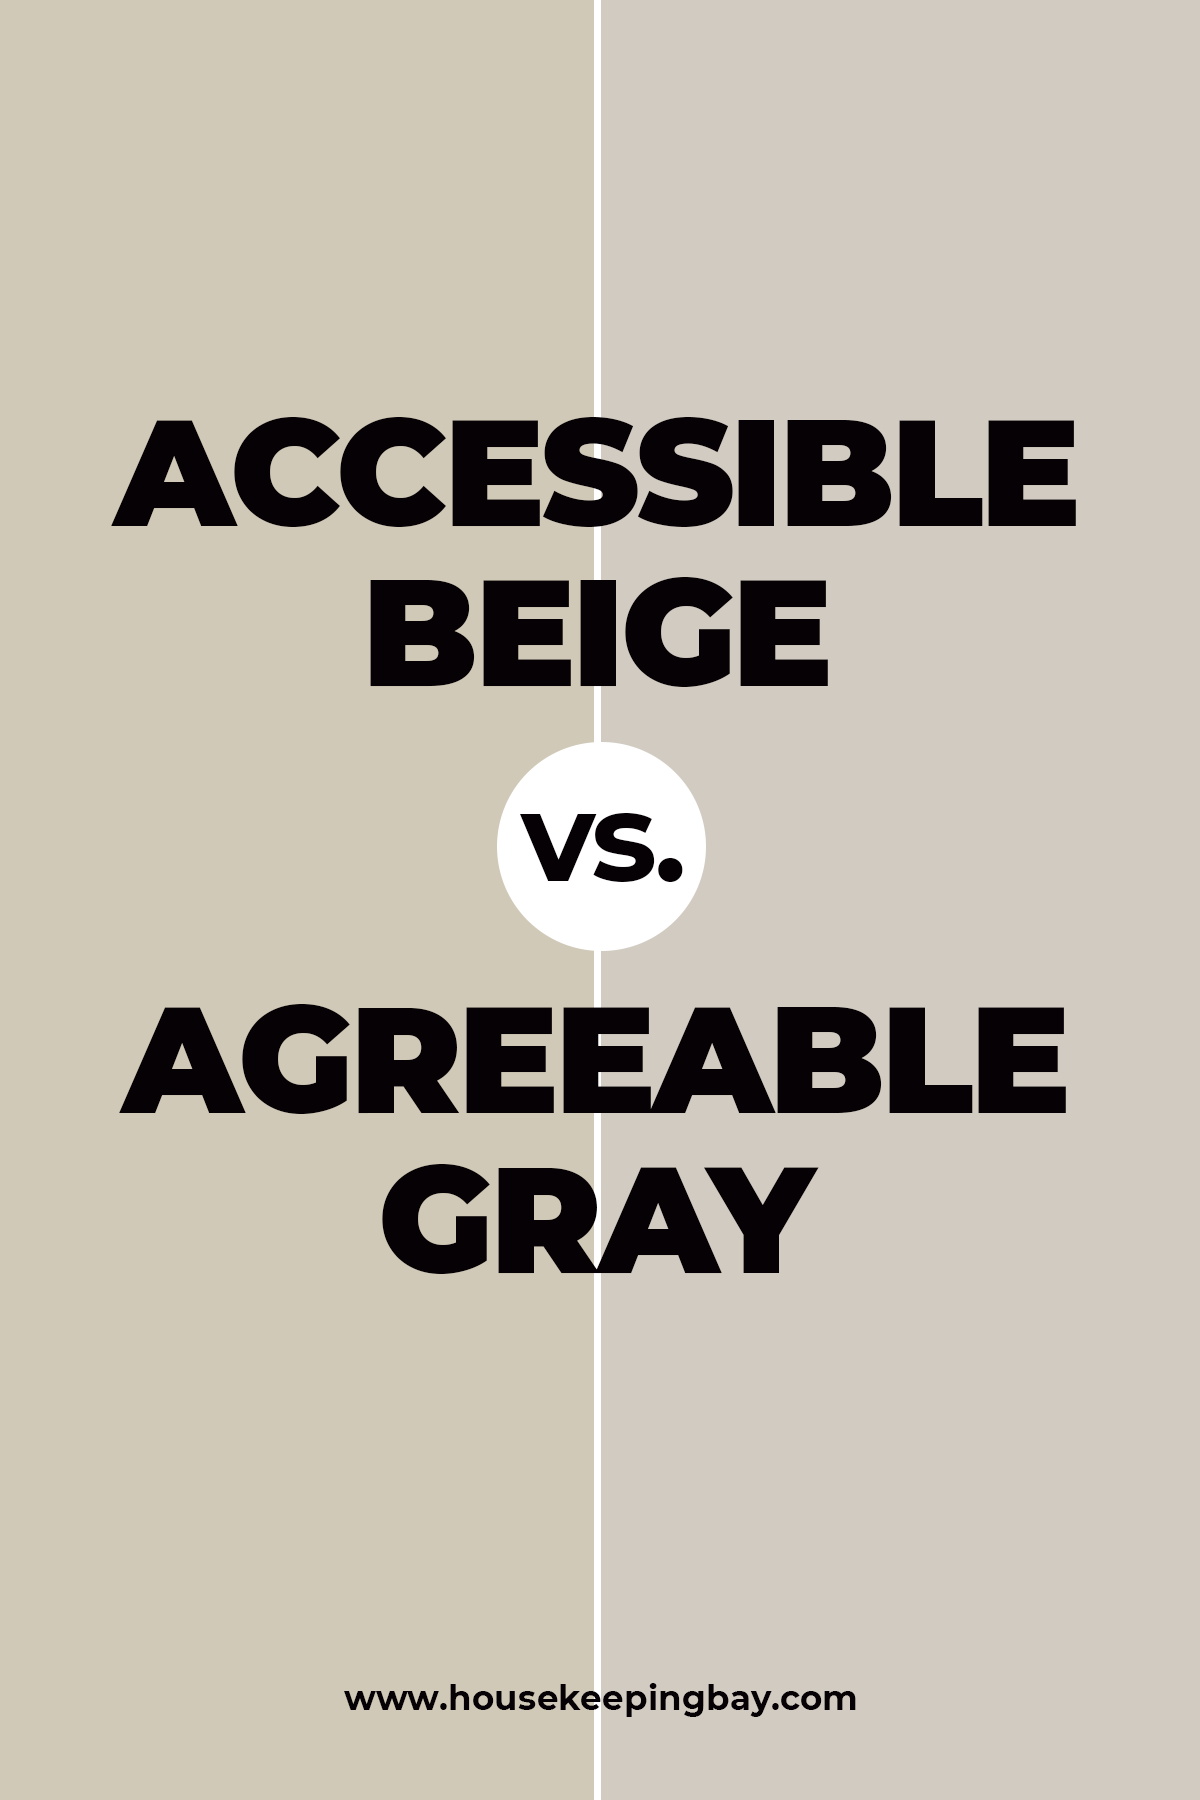 Accessible Beige vs Agreeable Gray